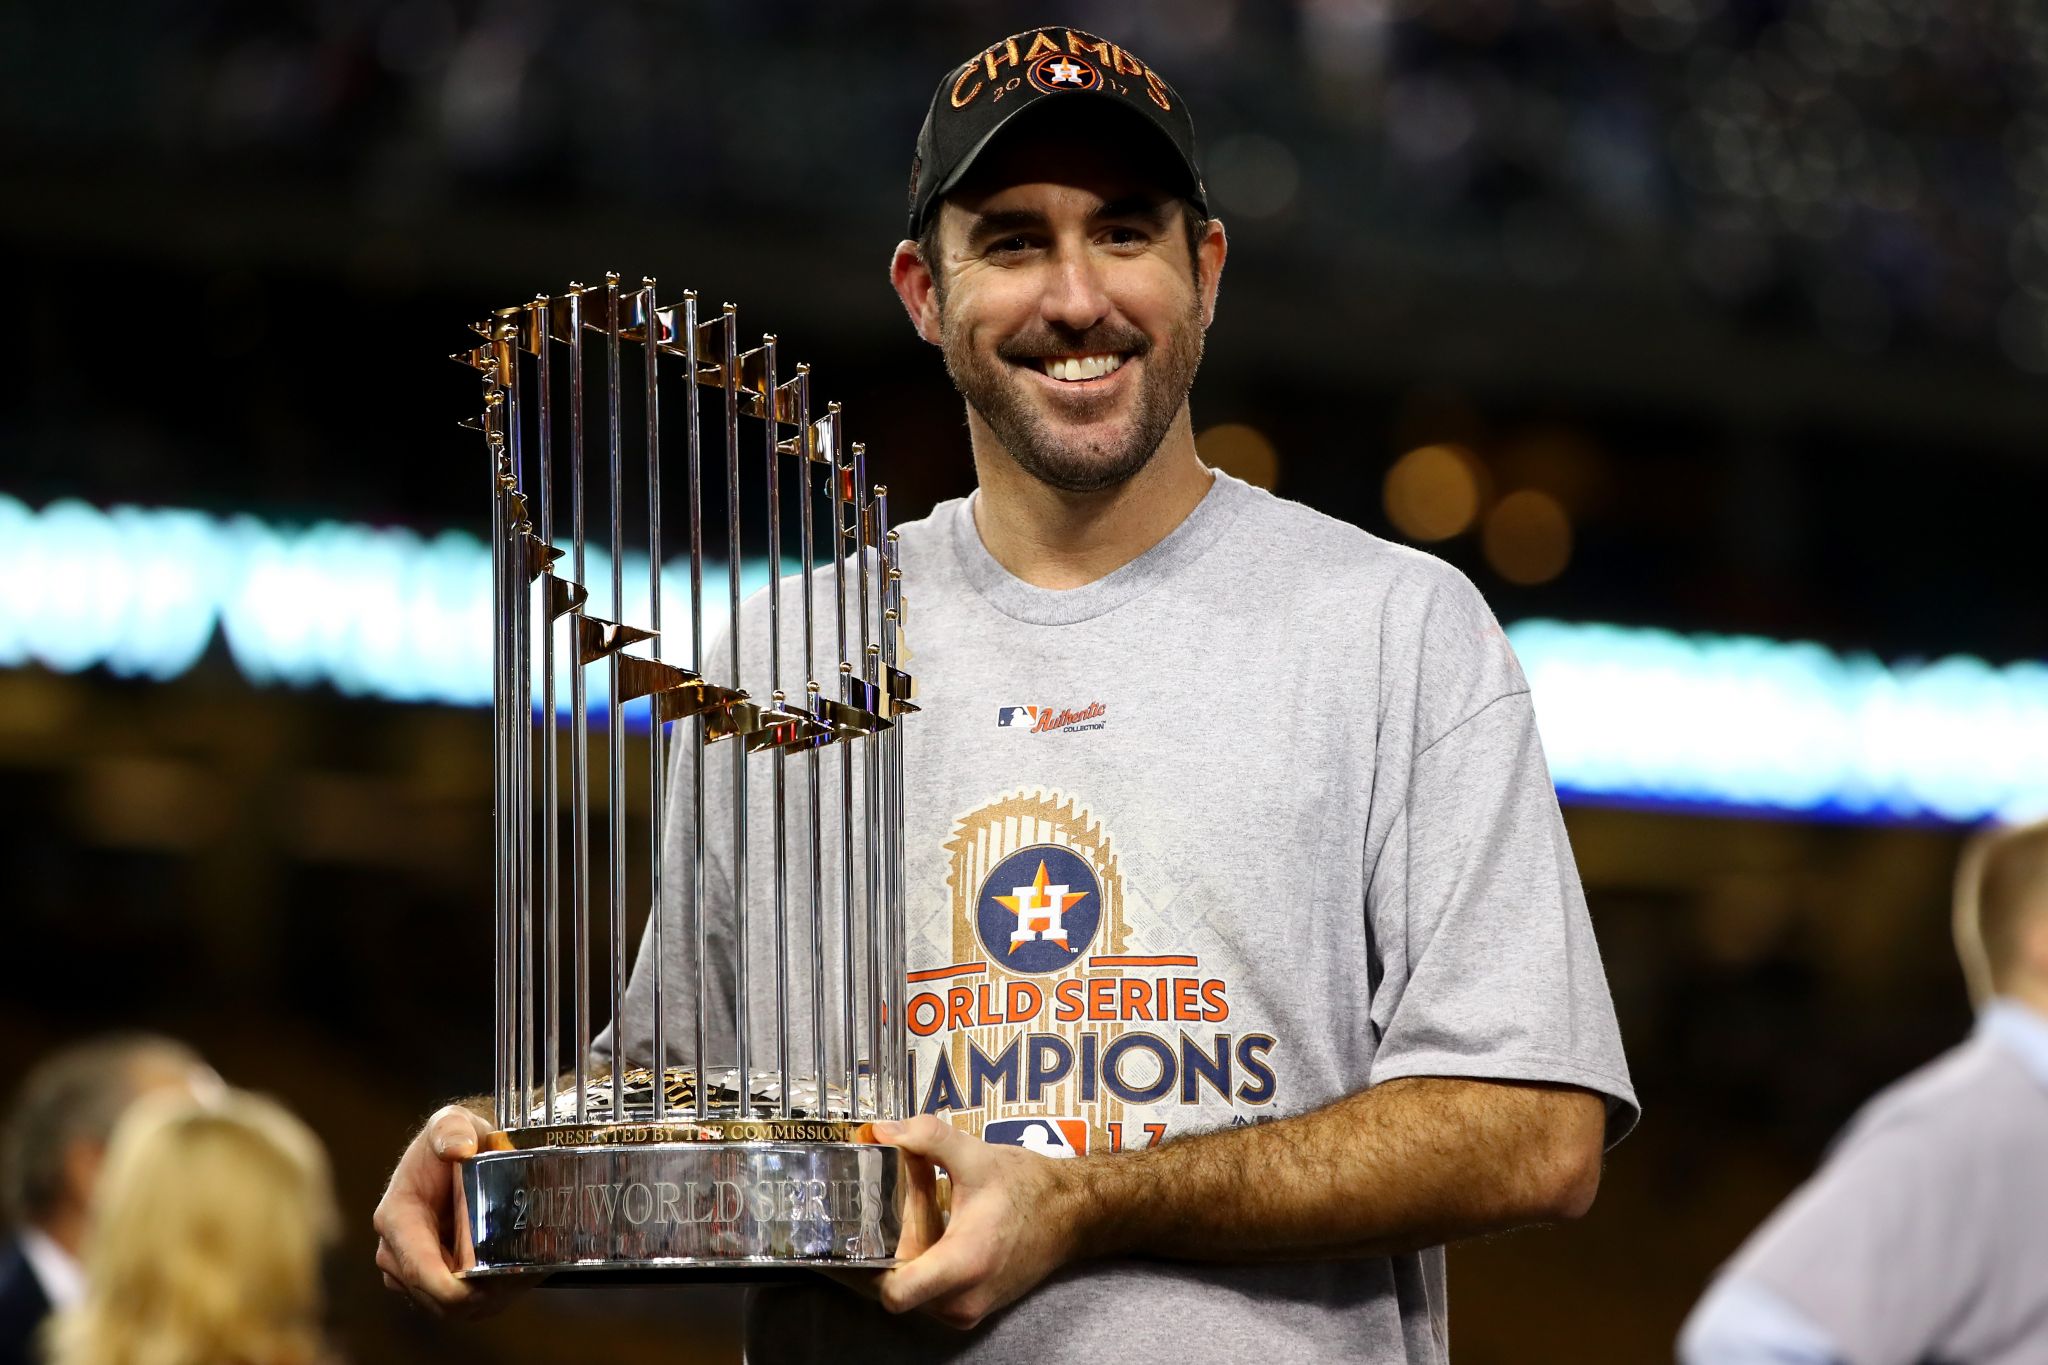 Astros fans will get 100 chances to see the World Series trophy in